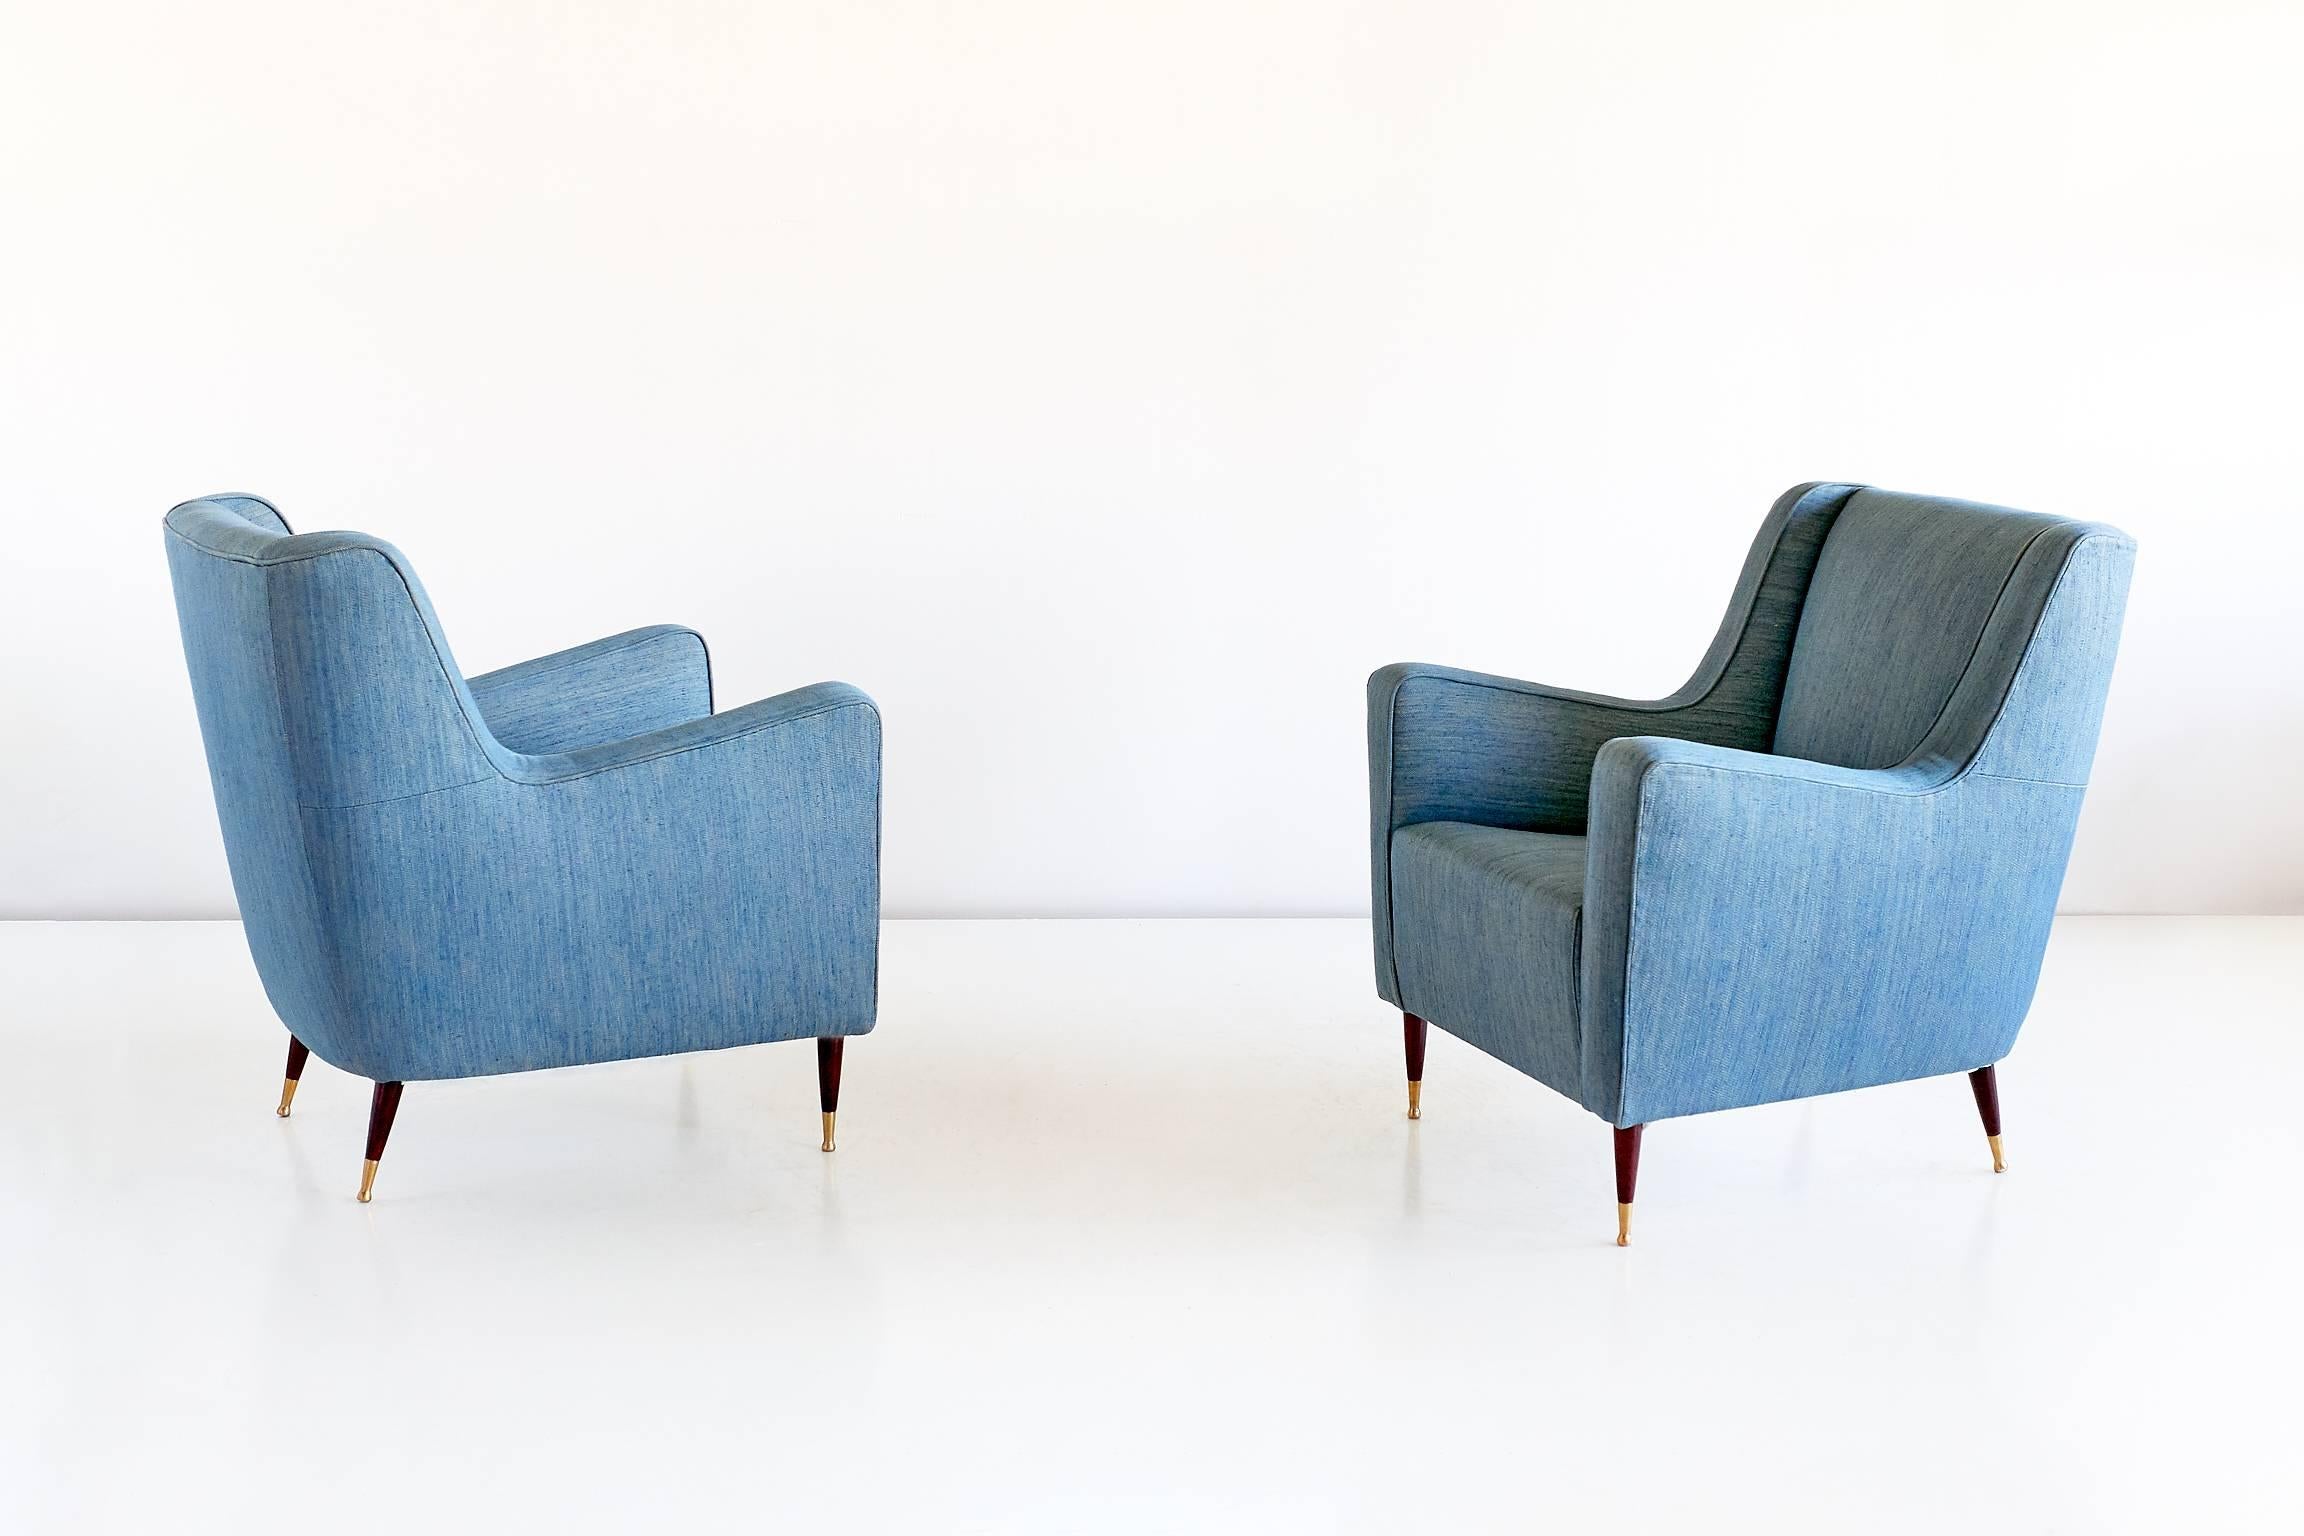 Stained Pair of Gio Ponti 'Conte Grande' Armchairs, Late 1940s